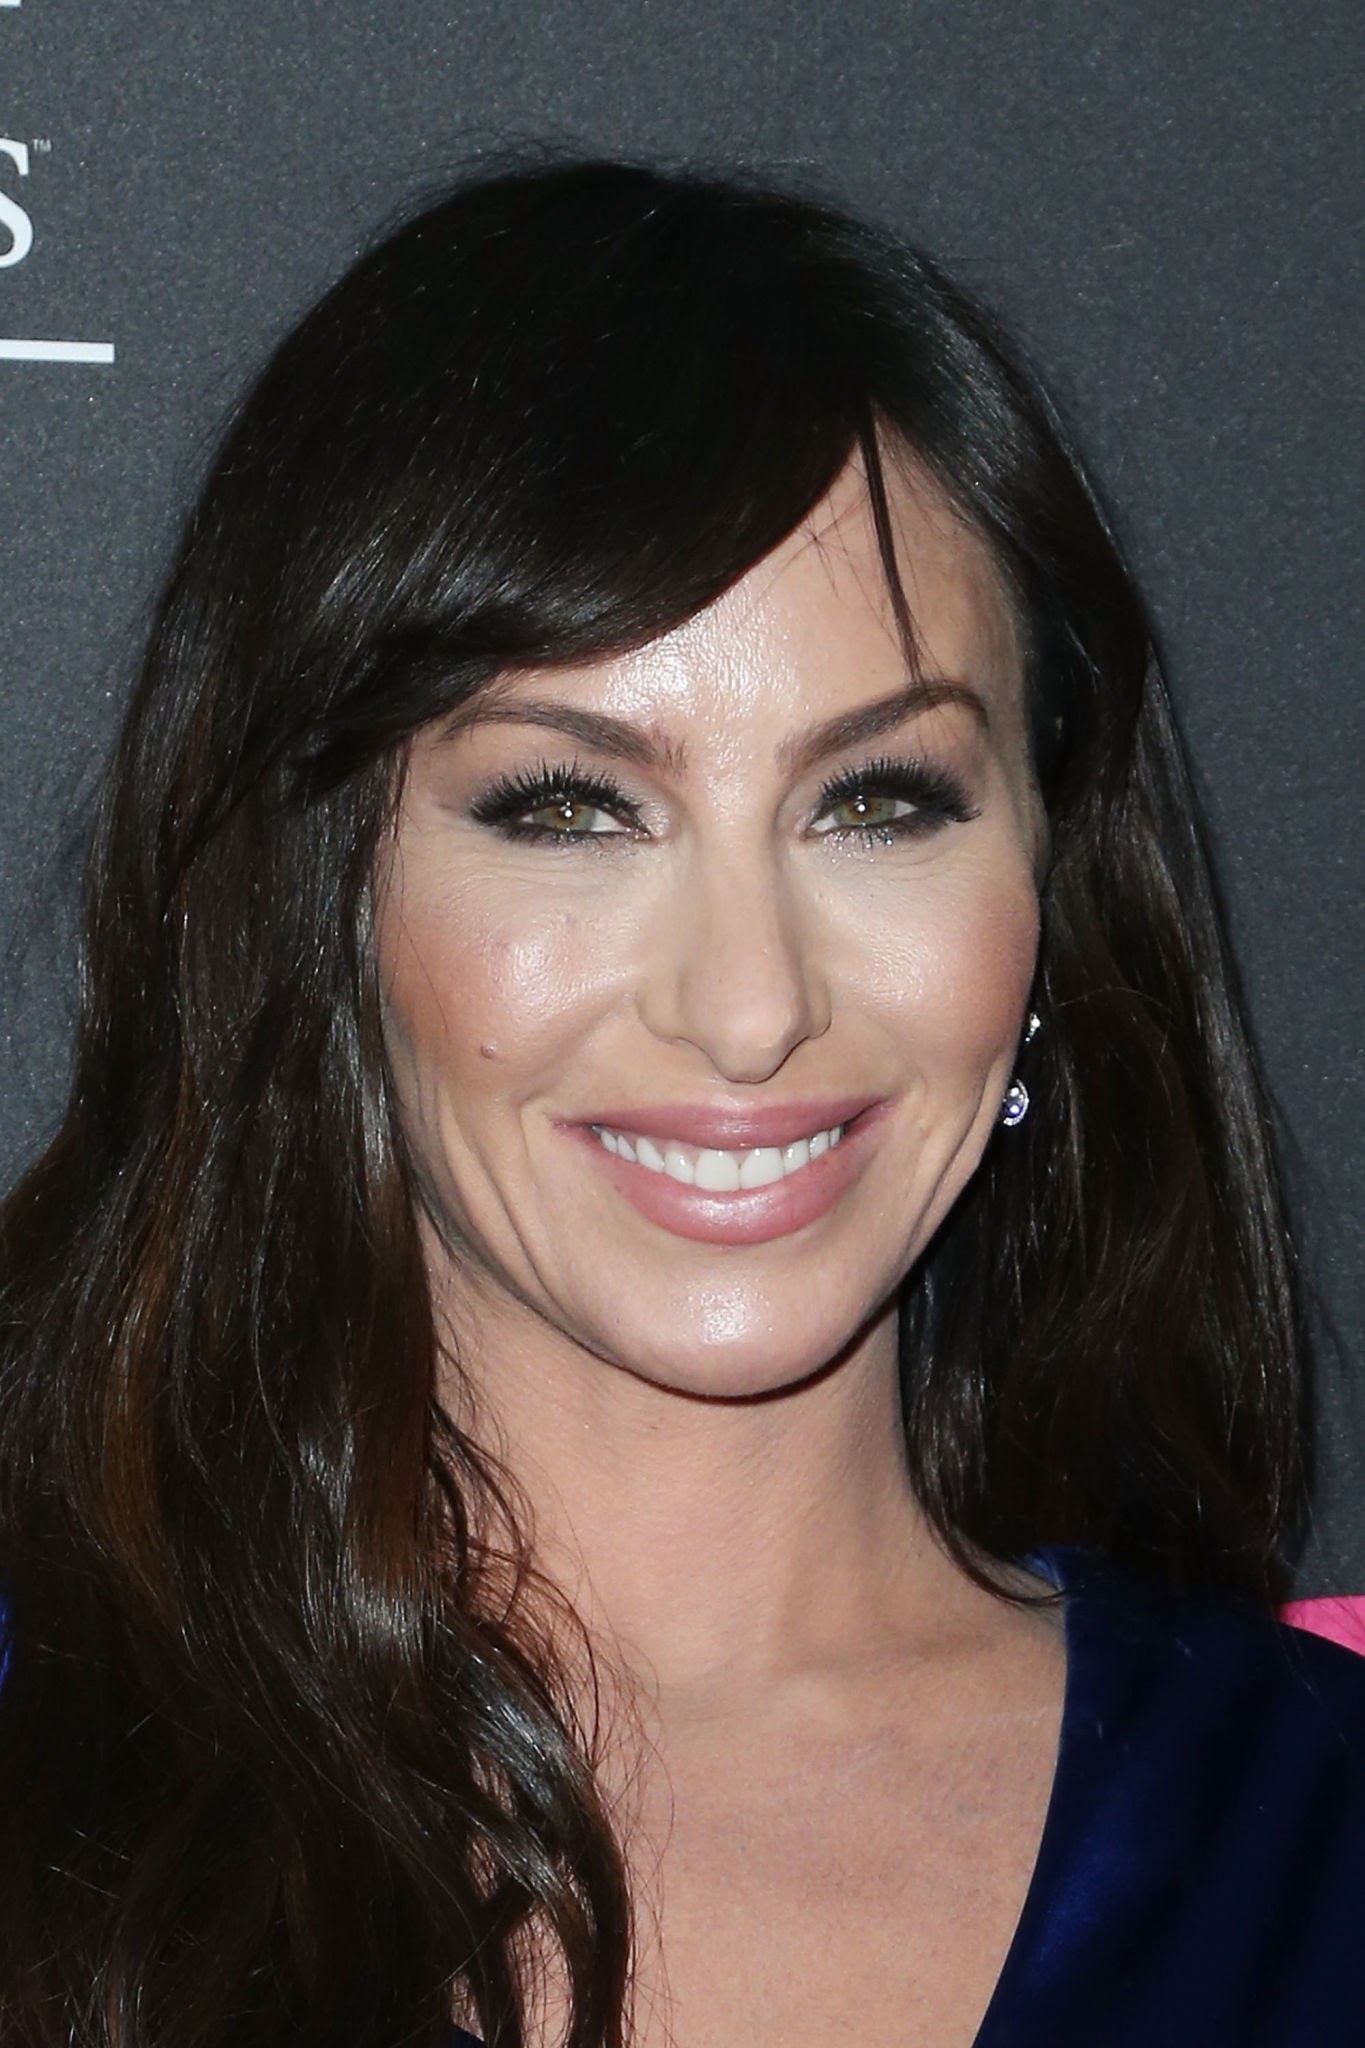 Separating fact from fiction in the life of Molly Bloom: from skiing star to celebrity poker host